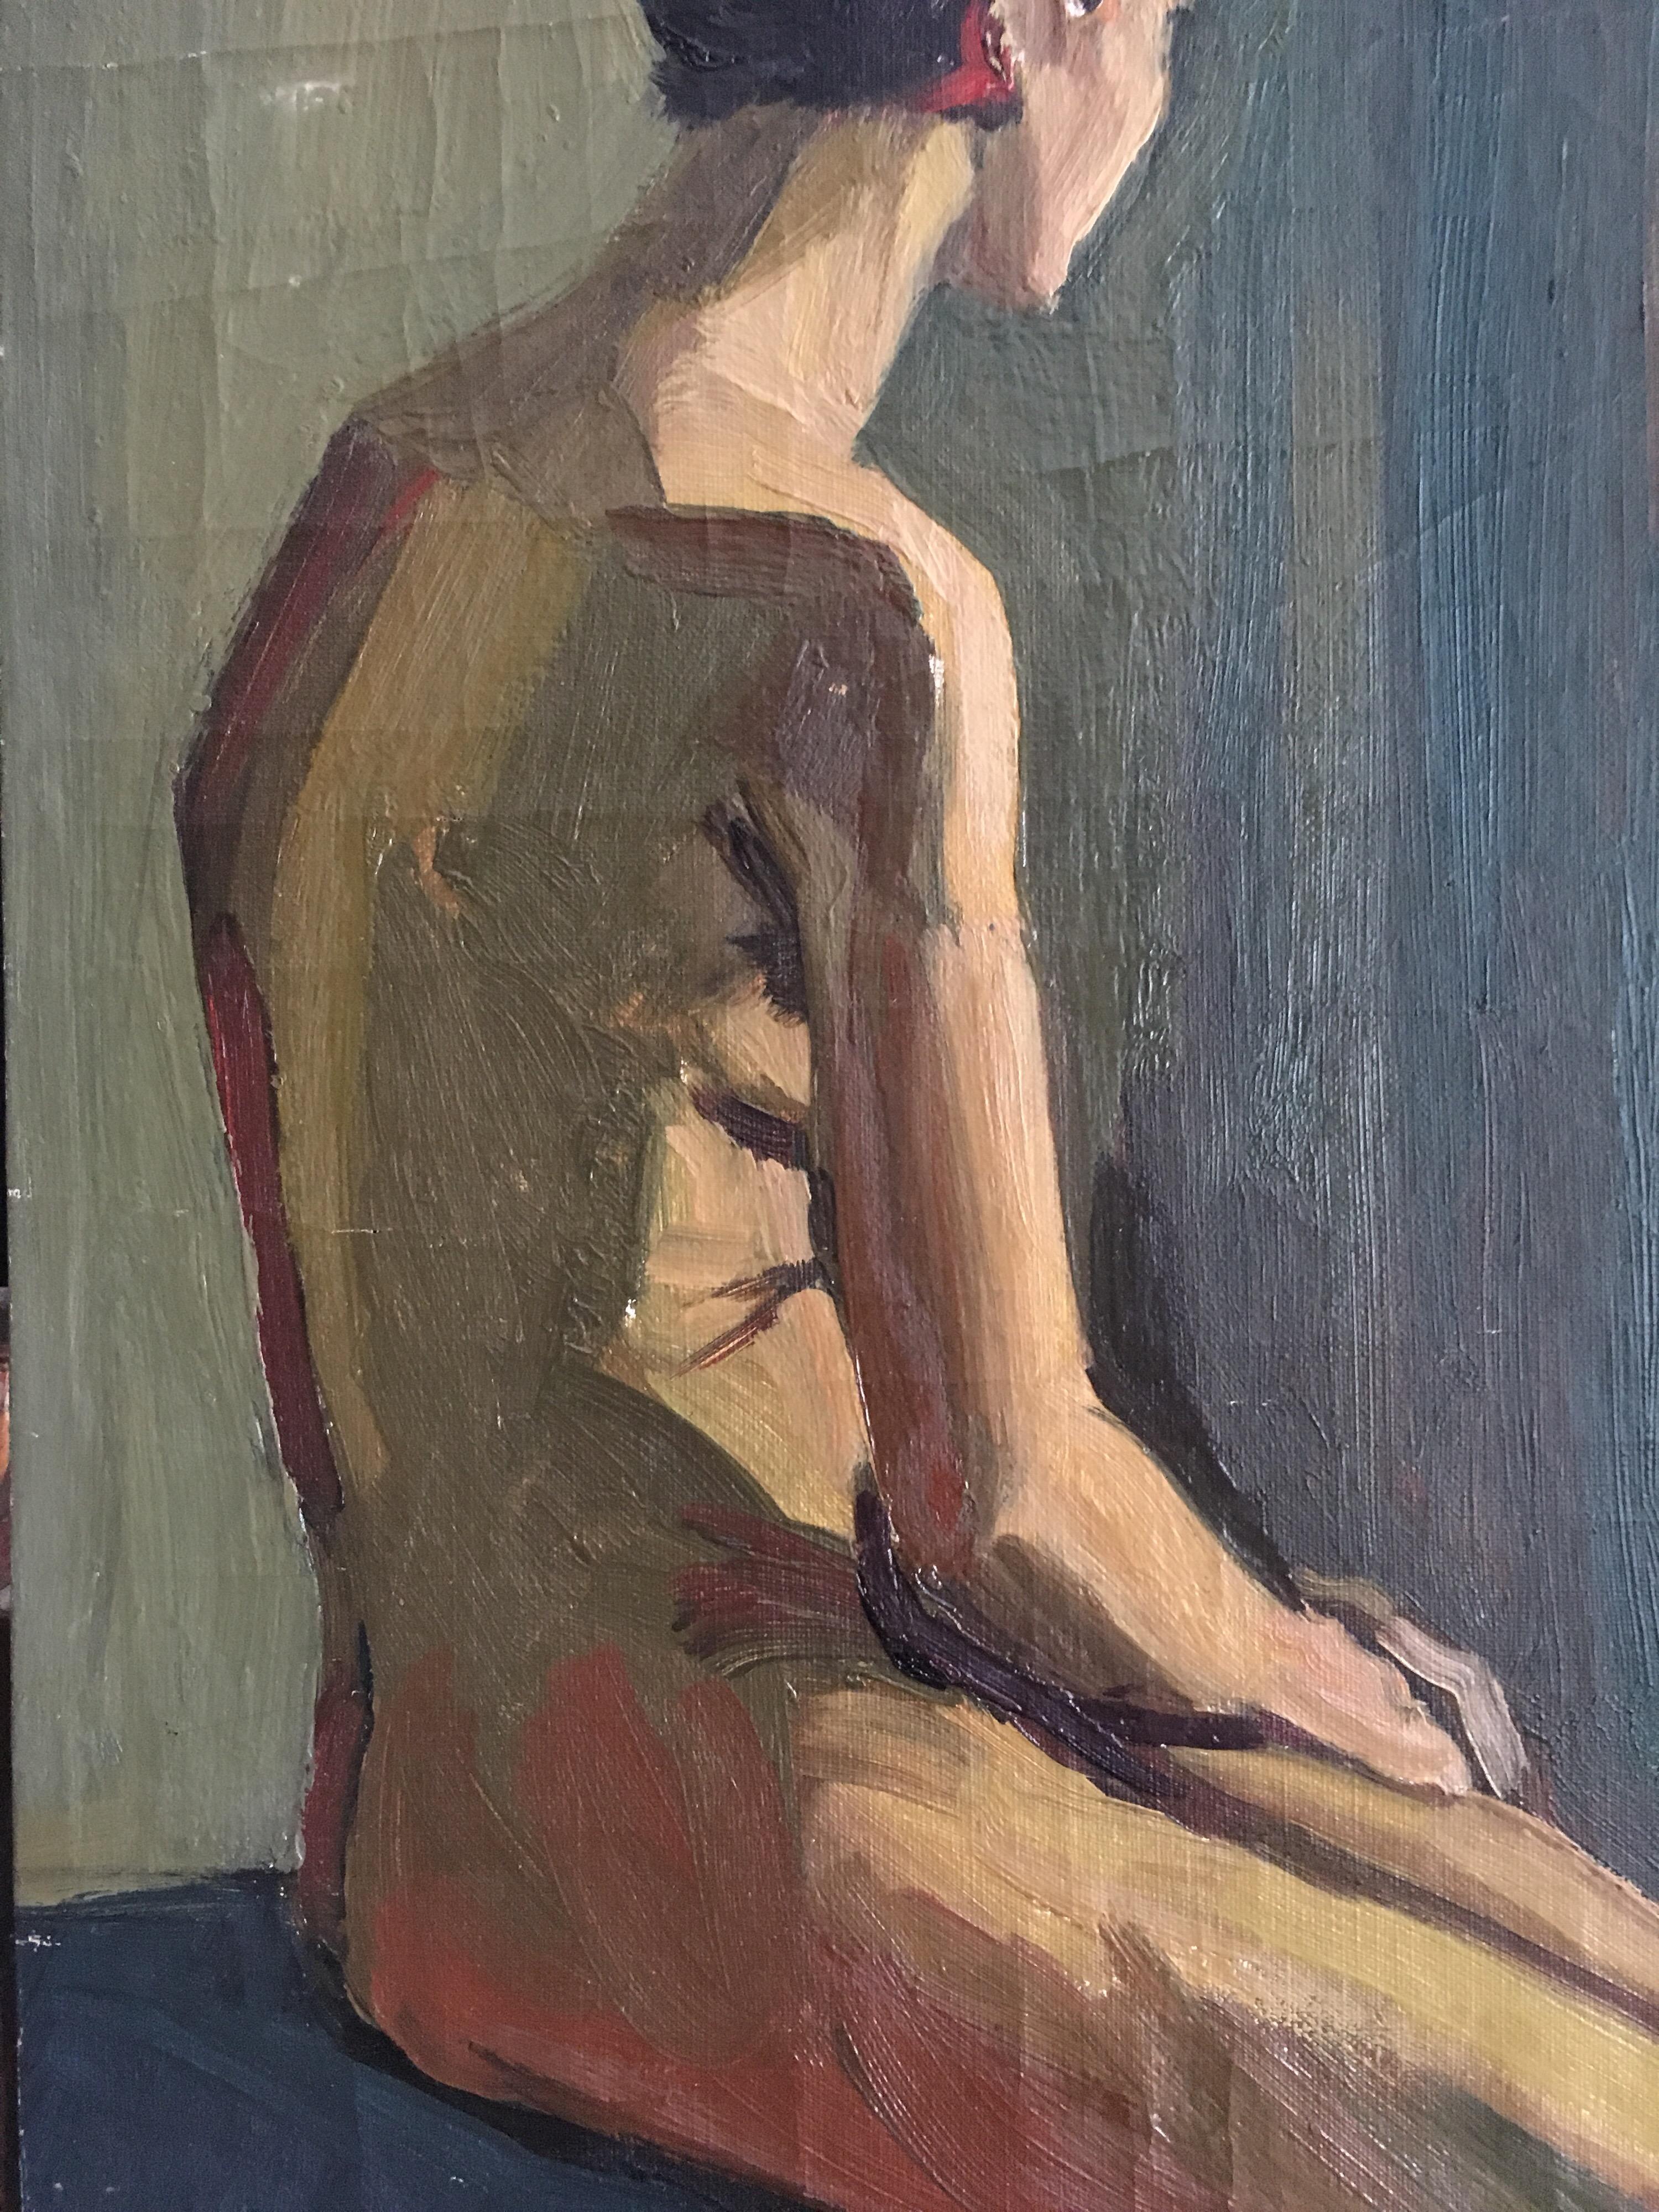 Large Nude Portrait, Female Model, Oil Painting
French School, mid 20th Century
Oil painting on canvas, unframed
Canvas size: 35 x 15.5 inches

Sublime nude portrait. This female model fills the space of the canvas in composition style that only a